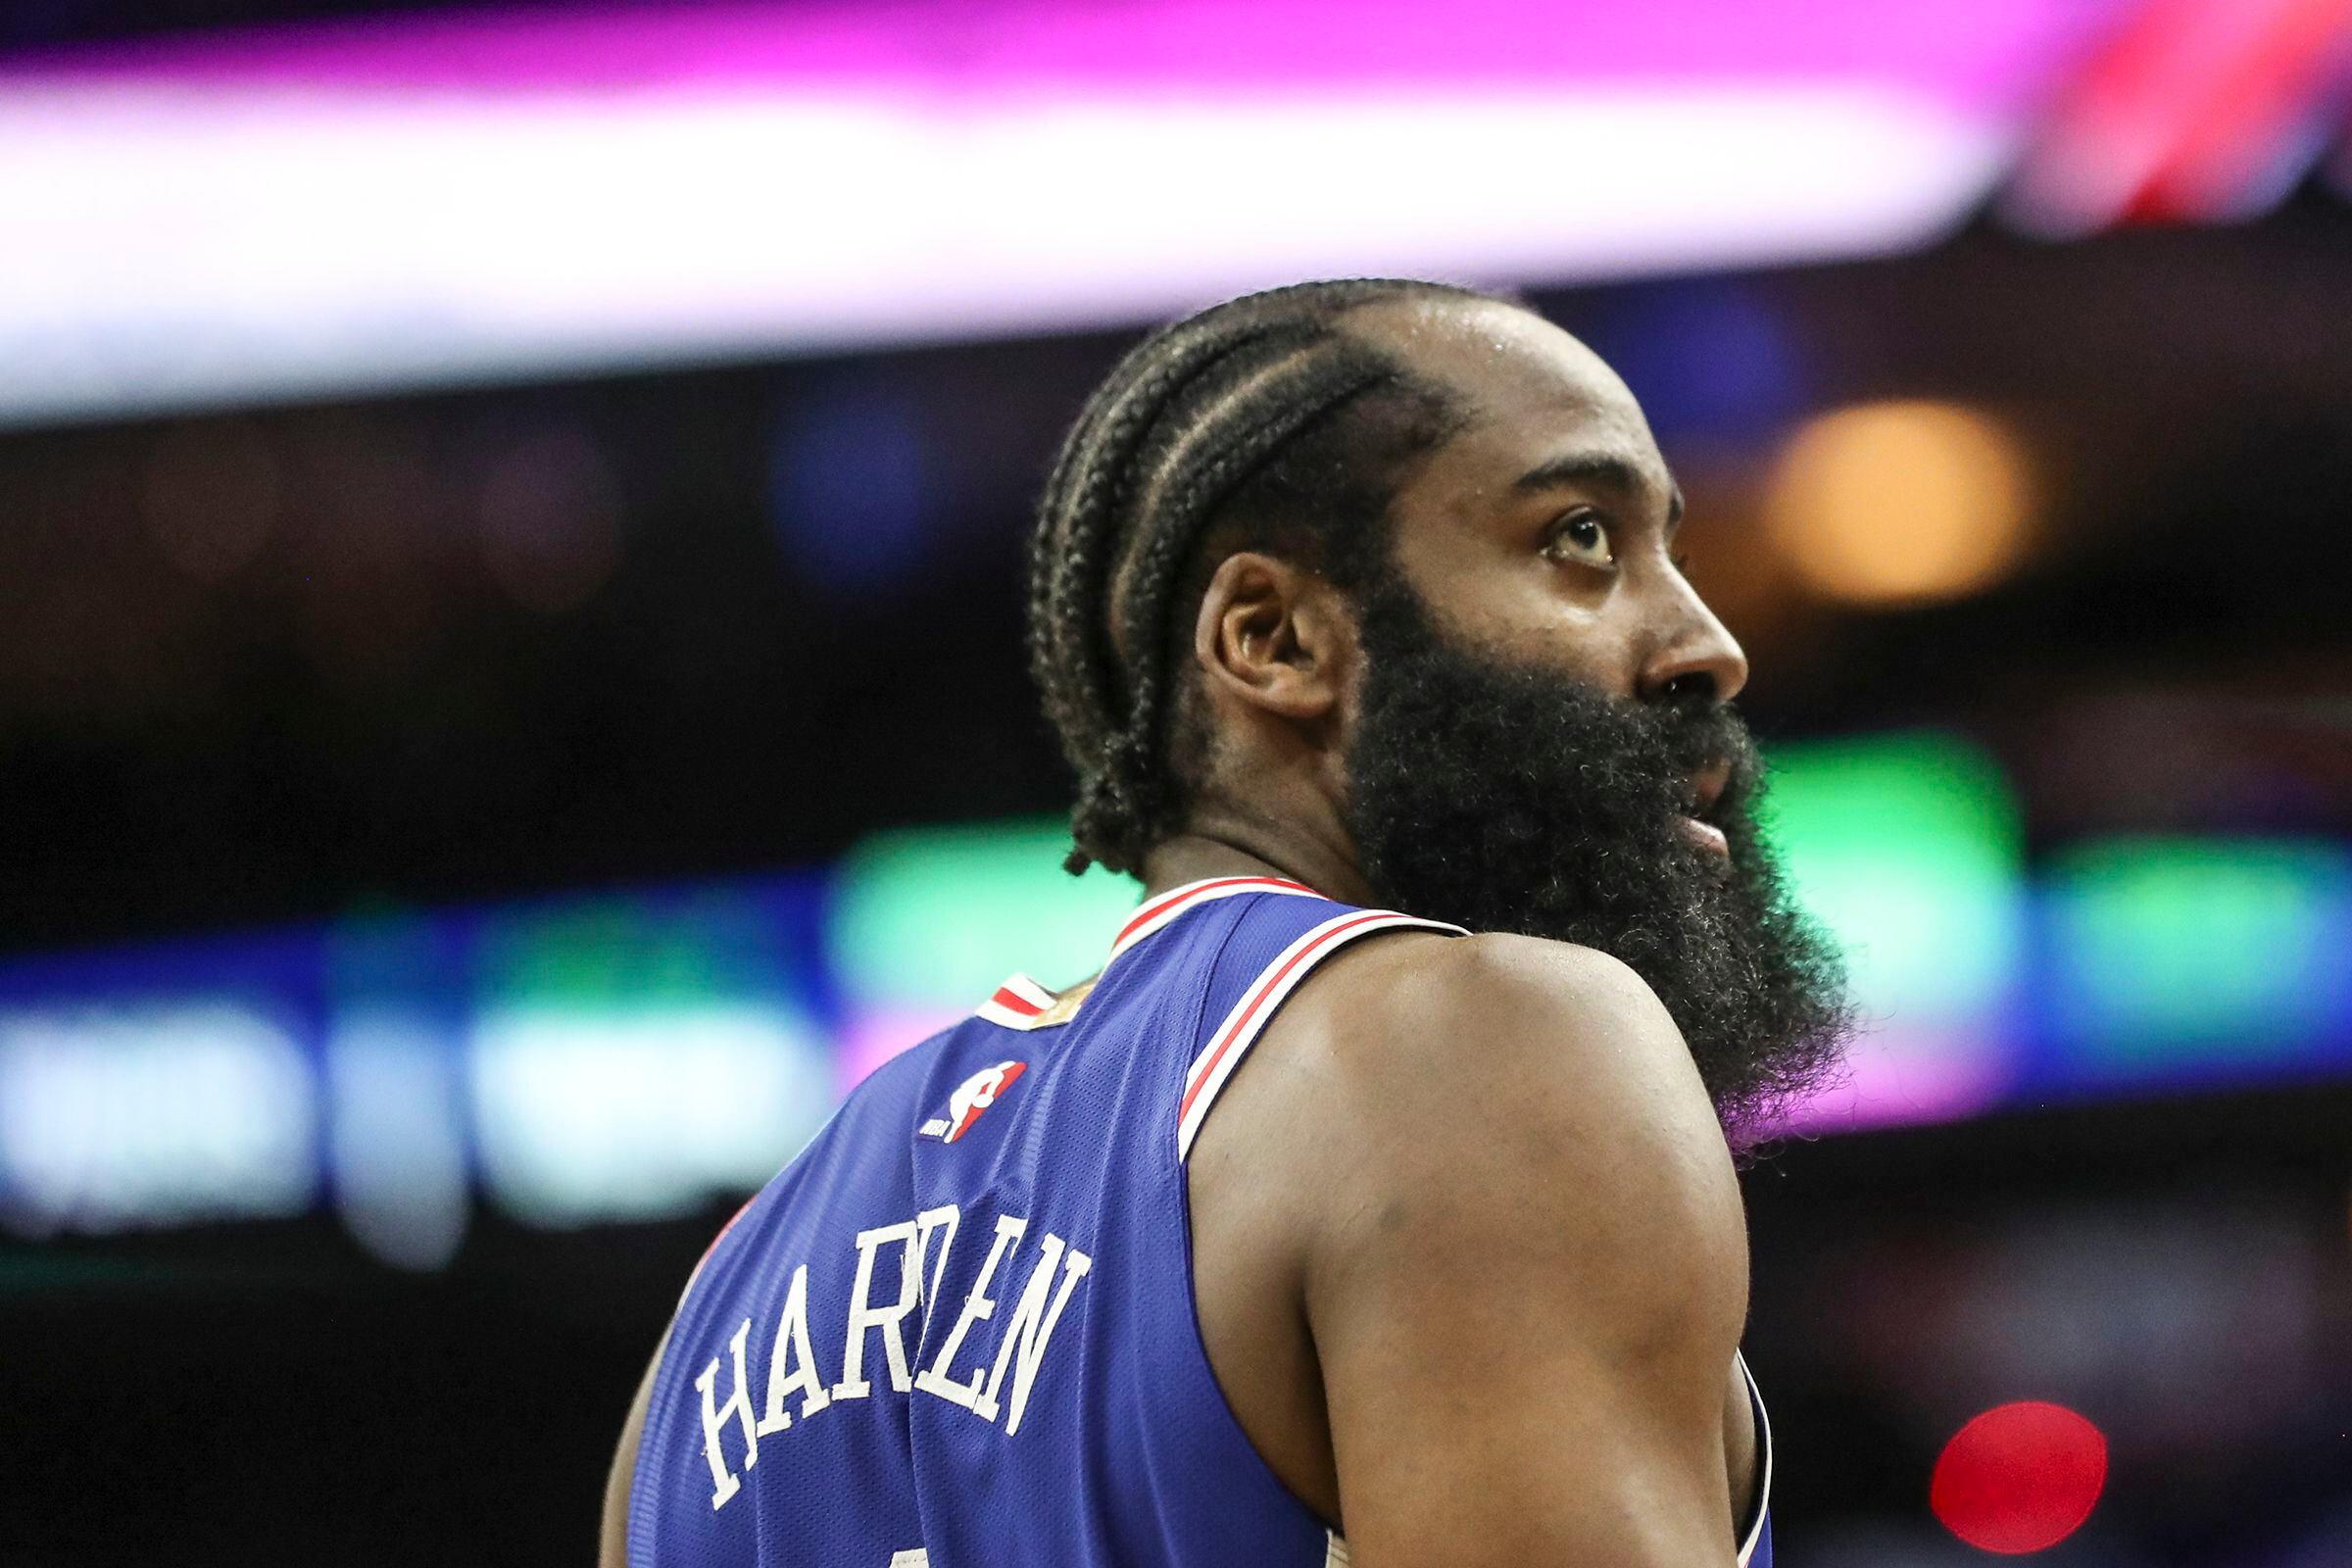 NBA Twitter reacts to James Harden's debut with Clippers: 'Harden's